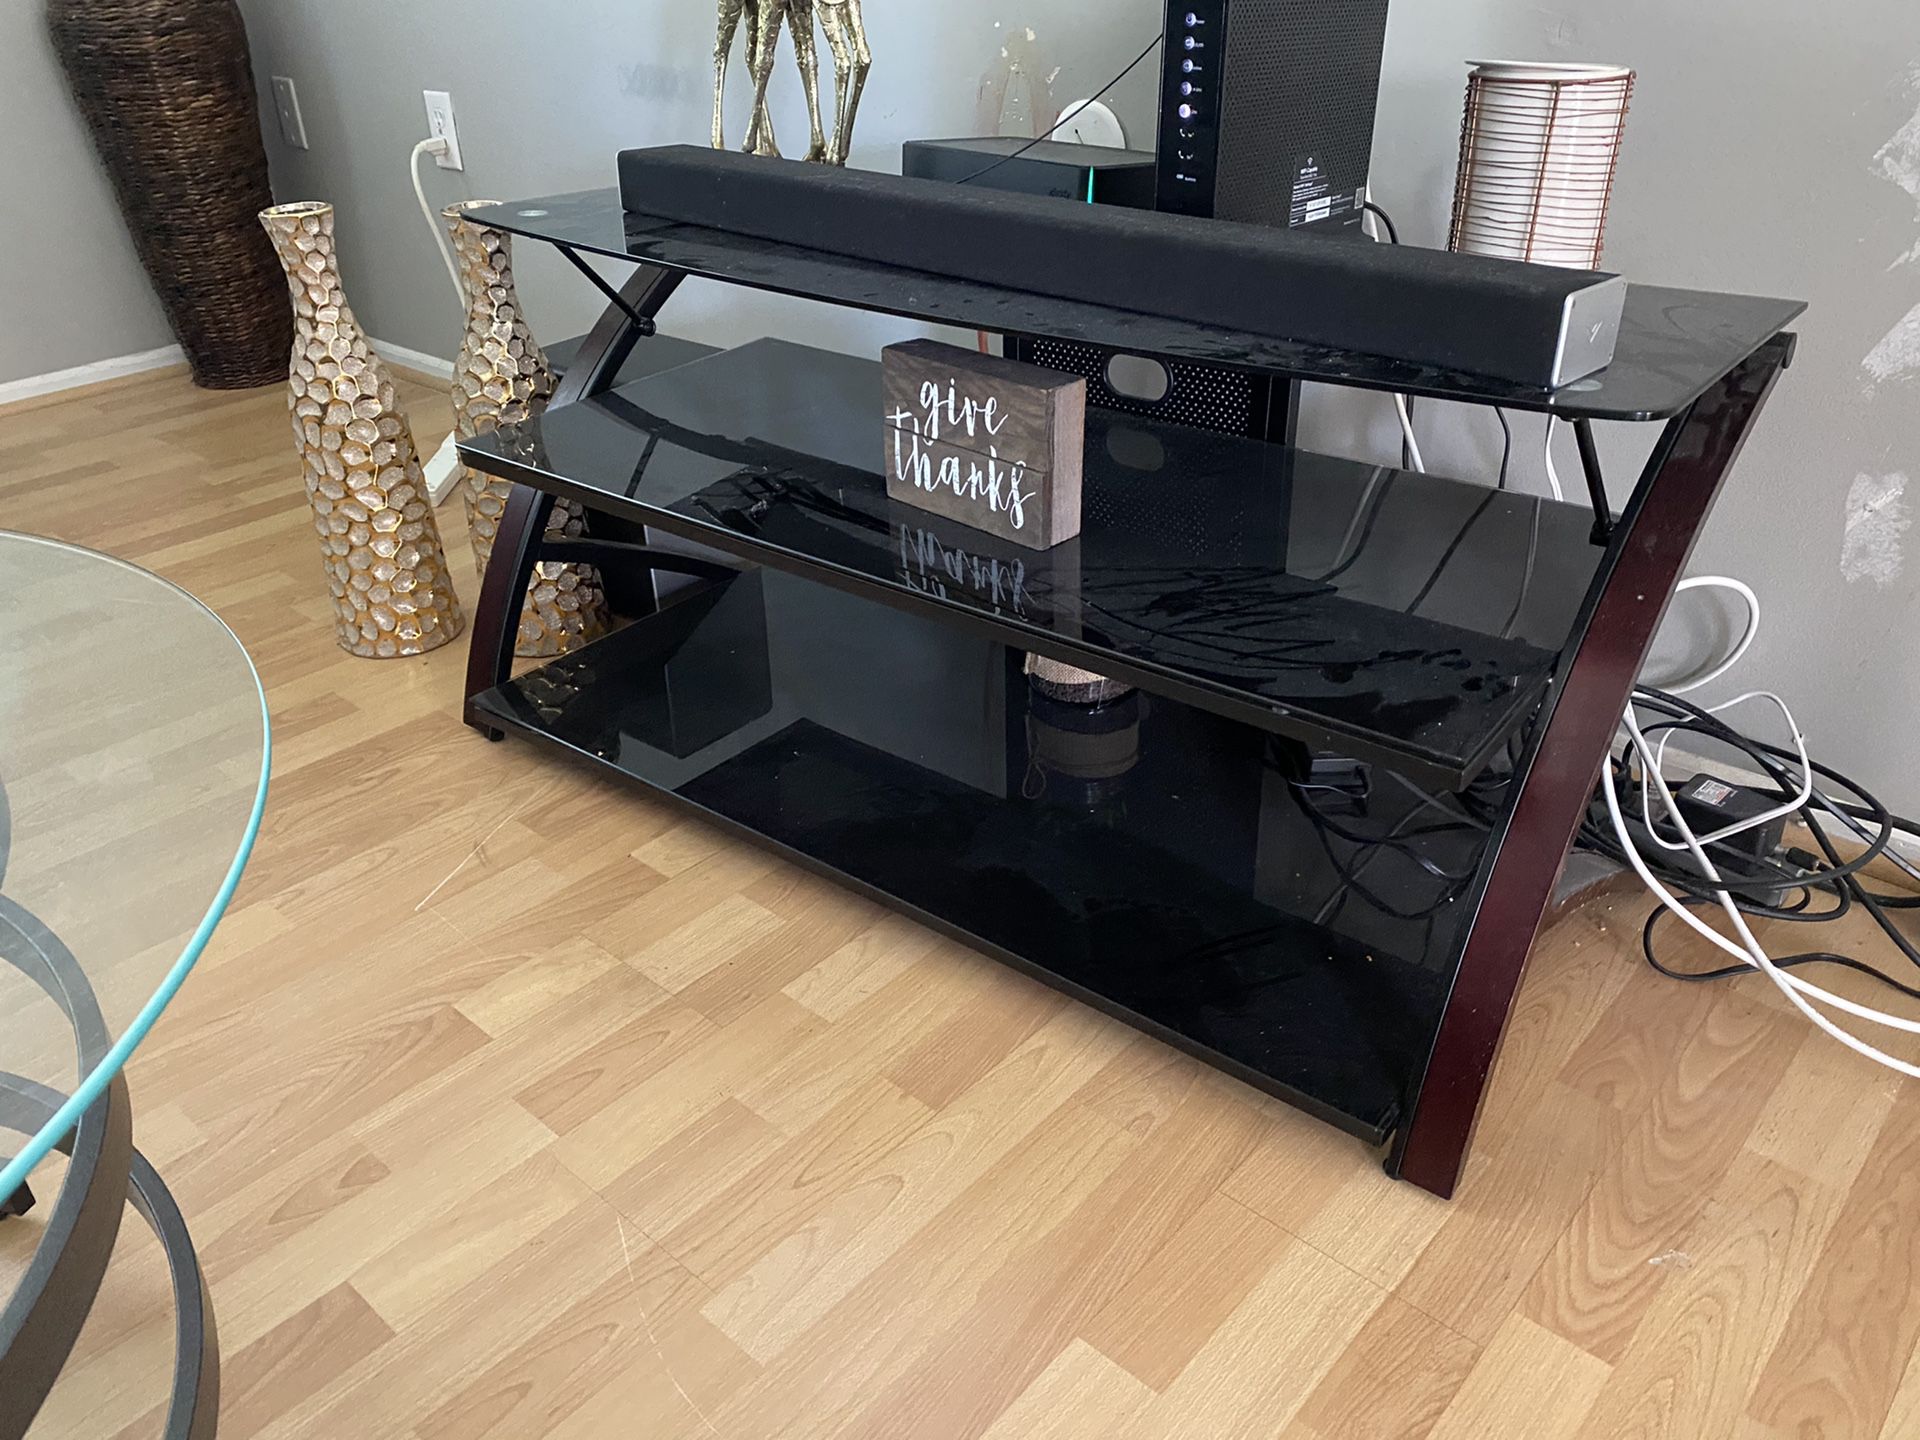 Tv table stand for $100 (Pick up only)